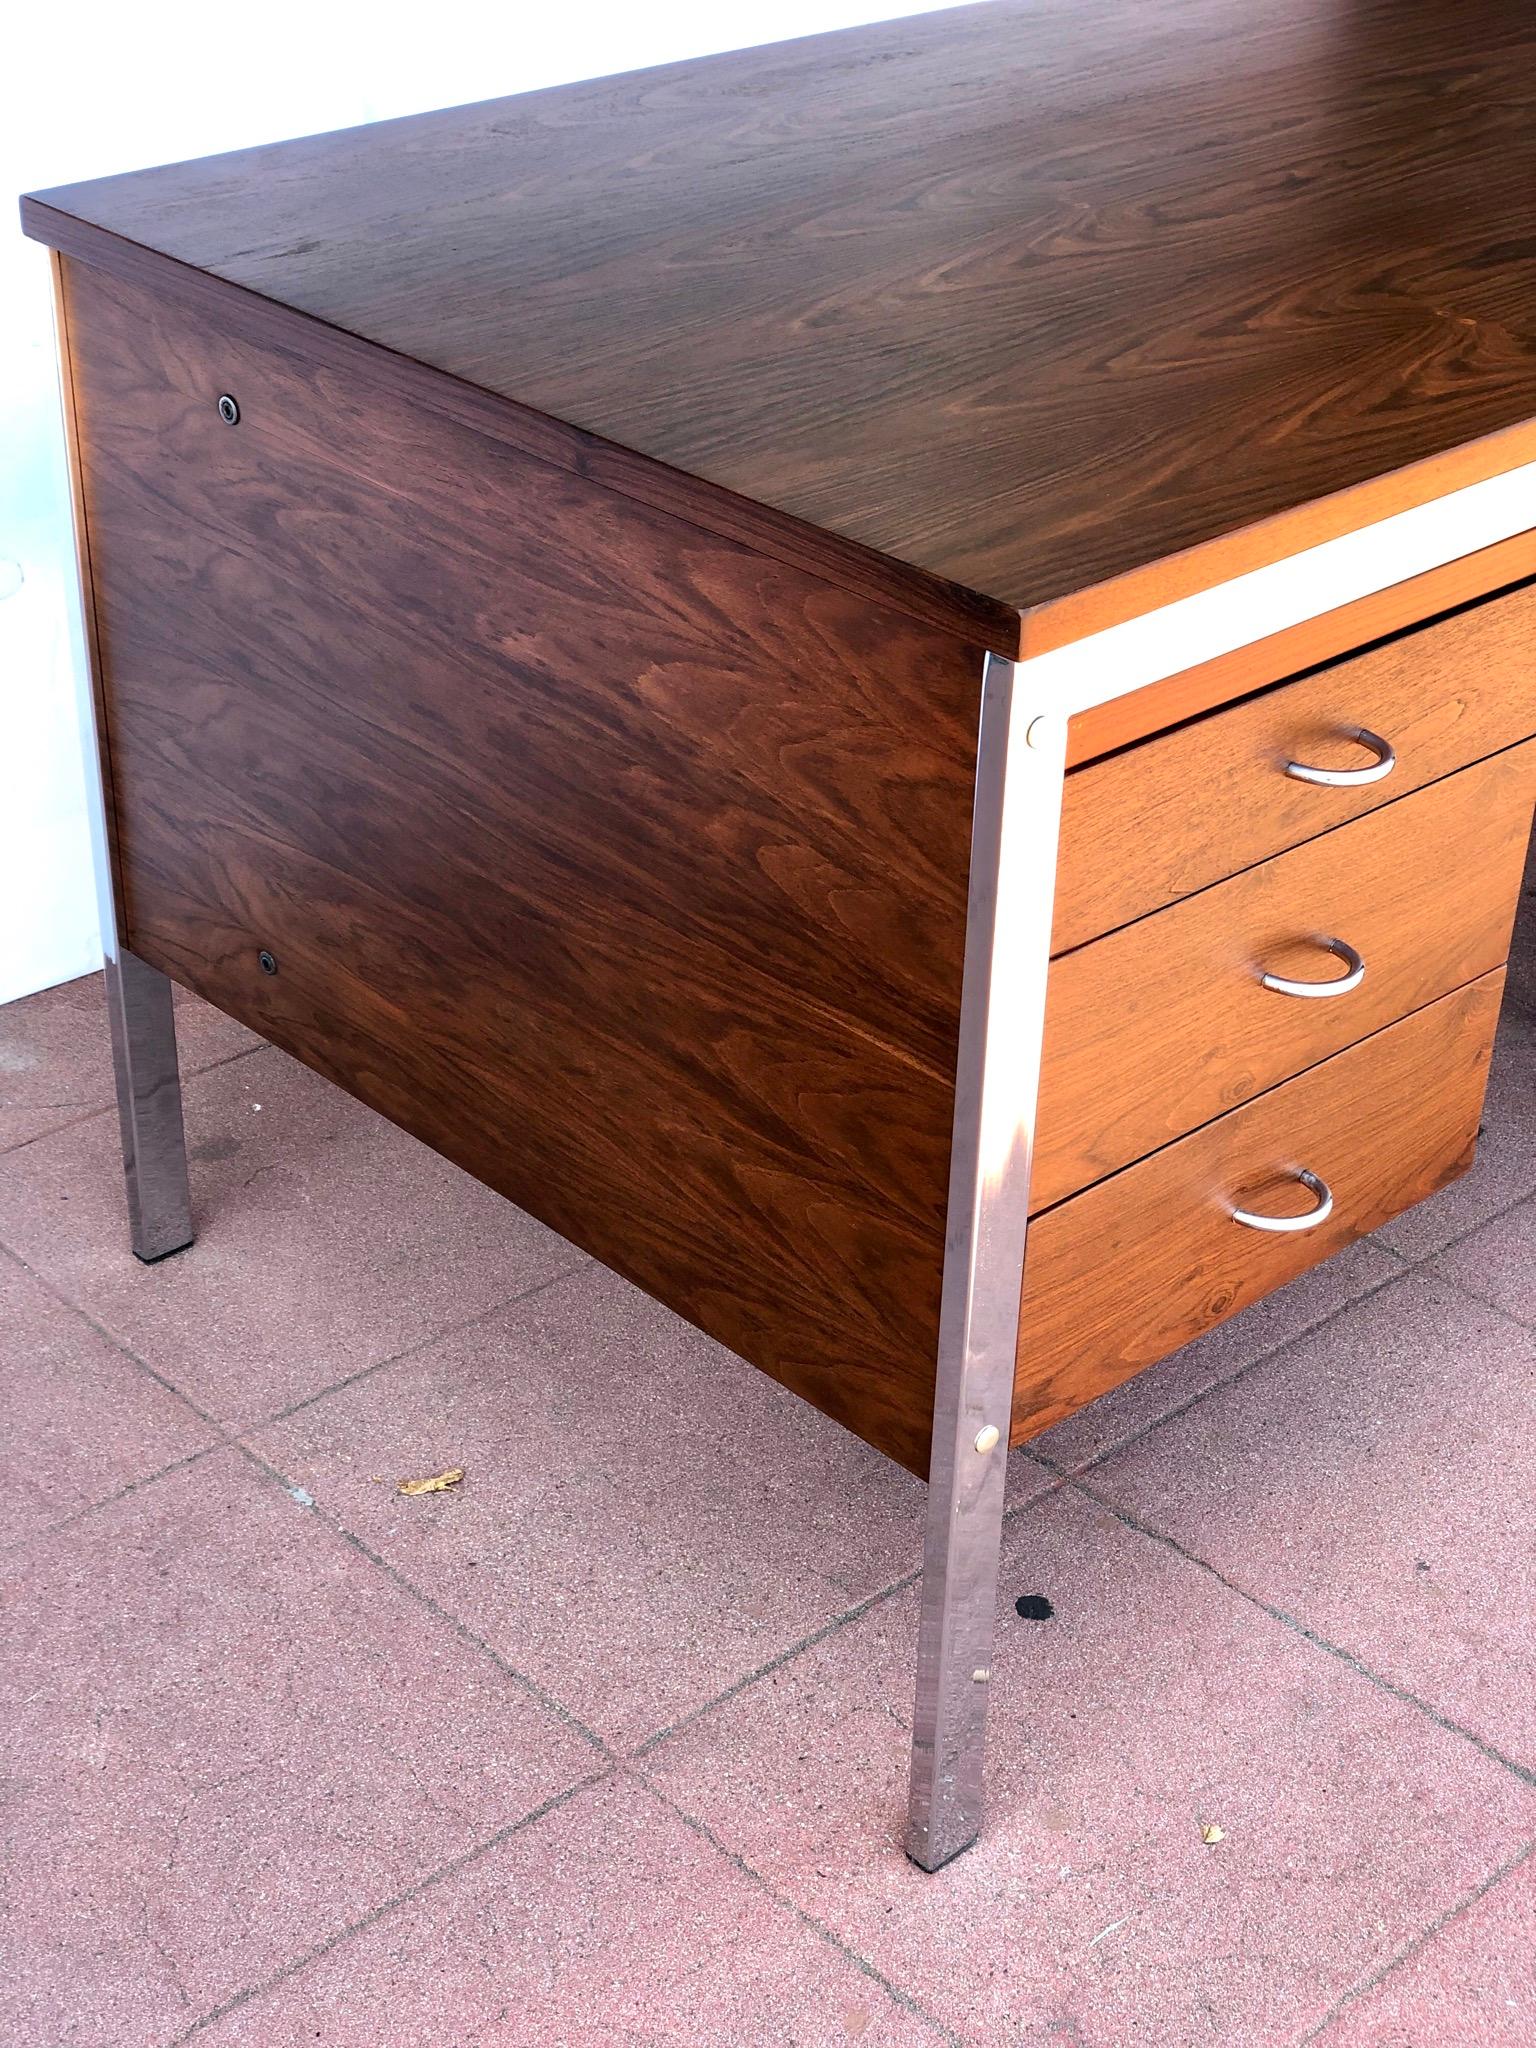 Beautiful and rare desk designed by Jean Gillion for Italma made in Brazil, circa 1960s with chrome accents, freshly restored with a couple of small repairs as shown overall great condition taken all apart , refinished and polished the chrome.